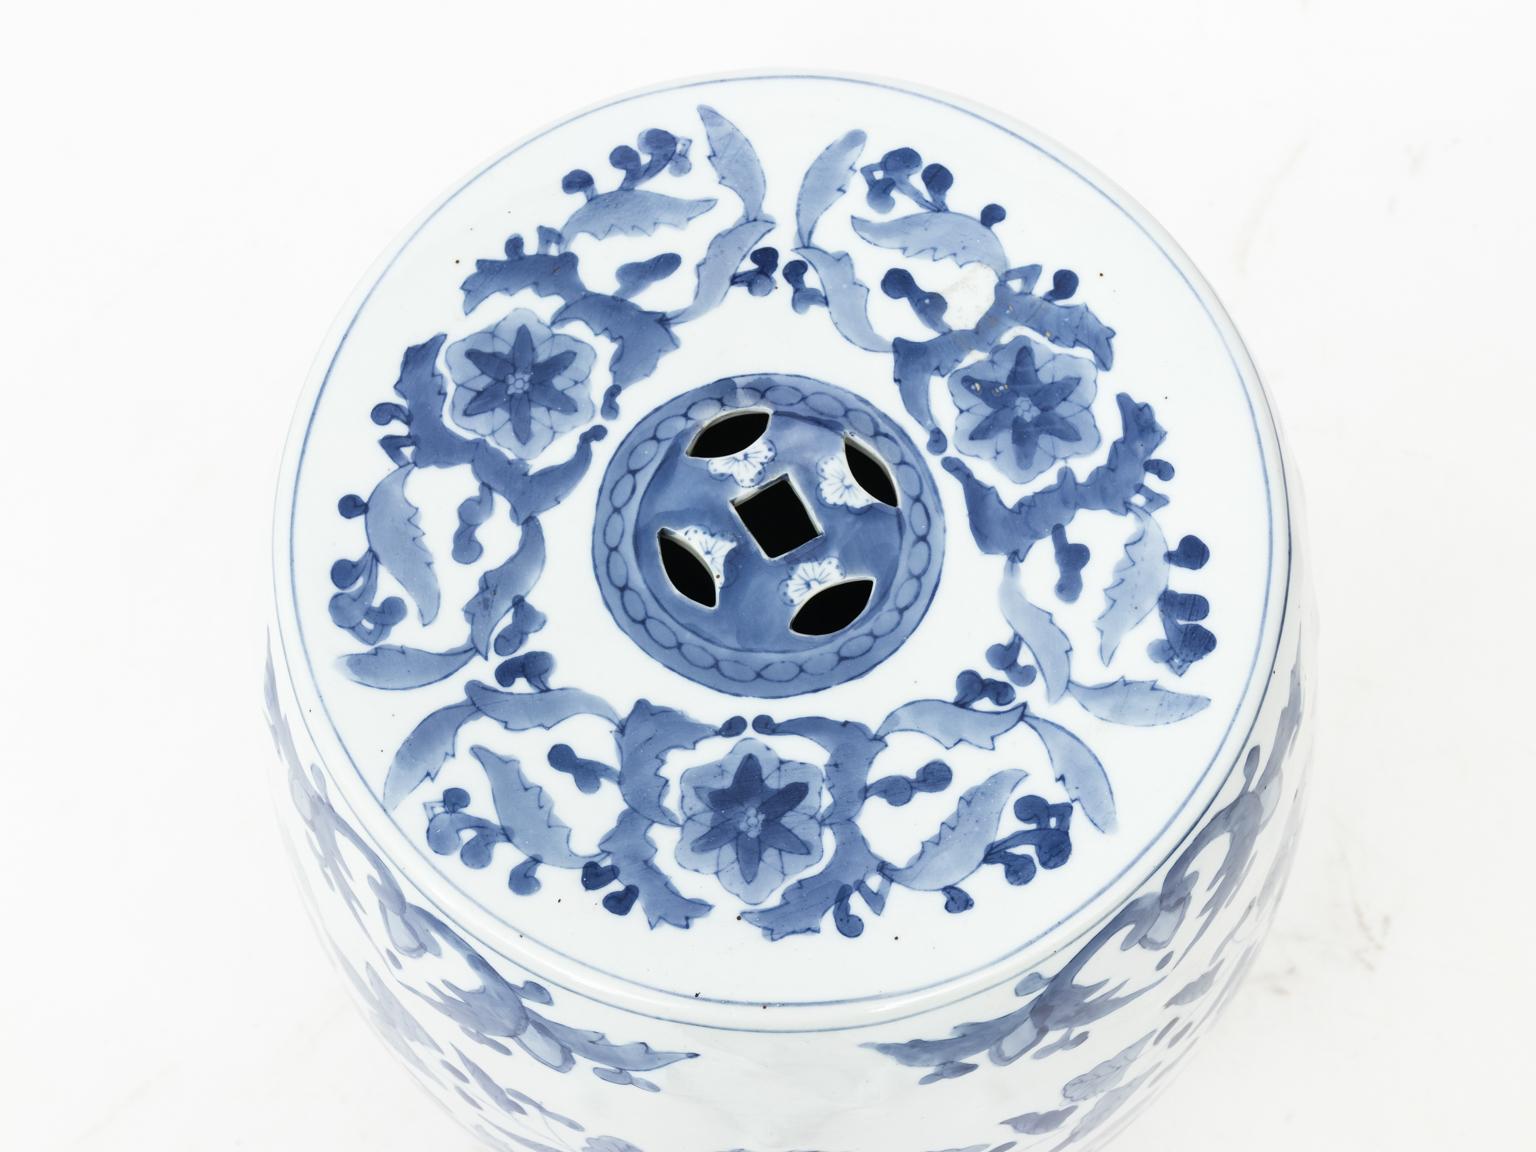 Blue and white Chinese porcelain garden seat with flower, phoenix, and dragon motifs, circa 20th century. Please note of wear consistent with age to the glazed finish.